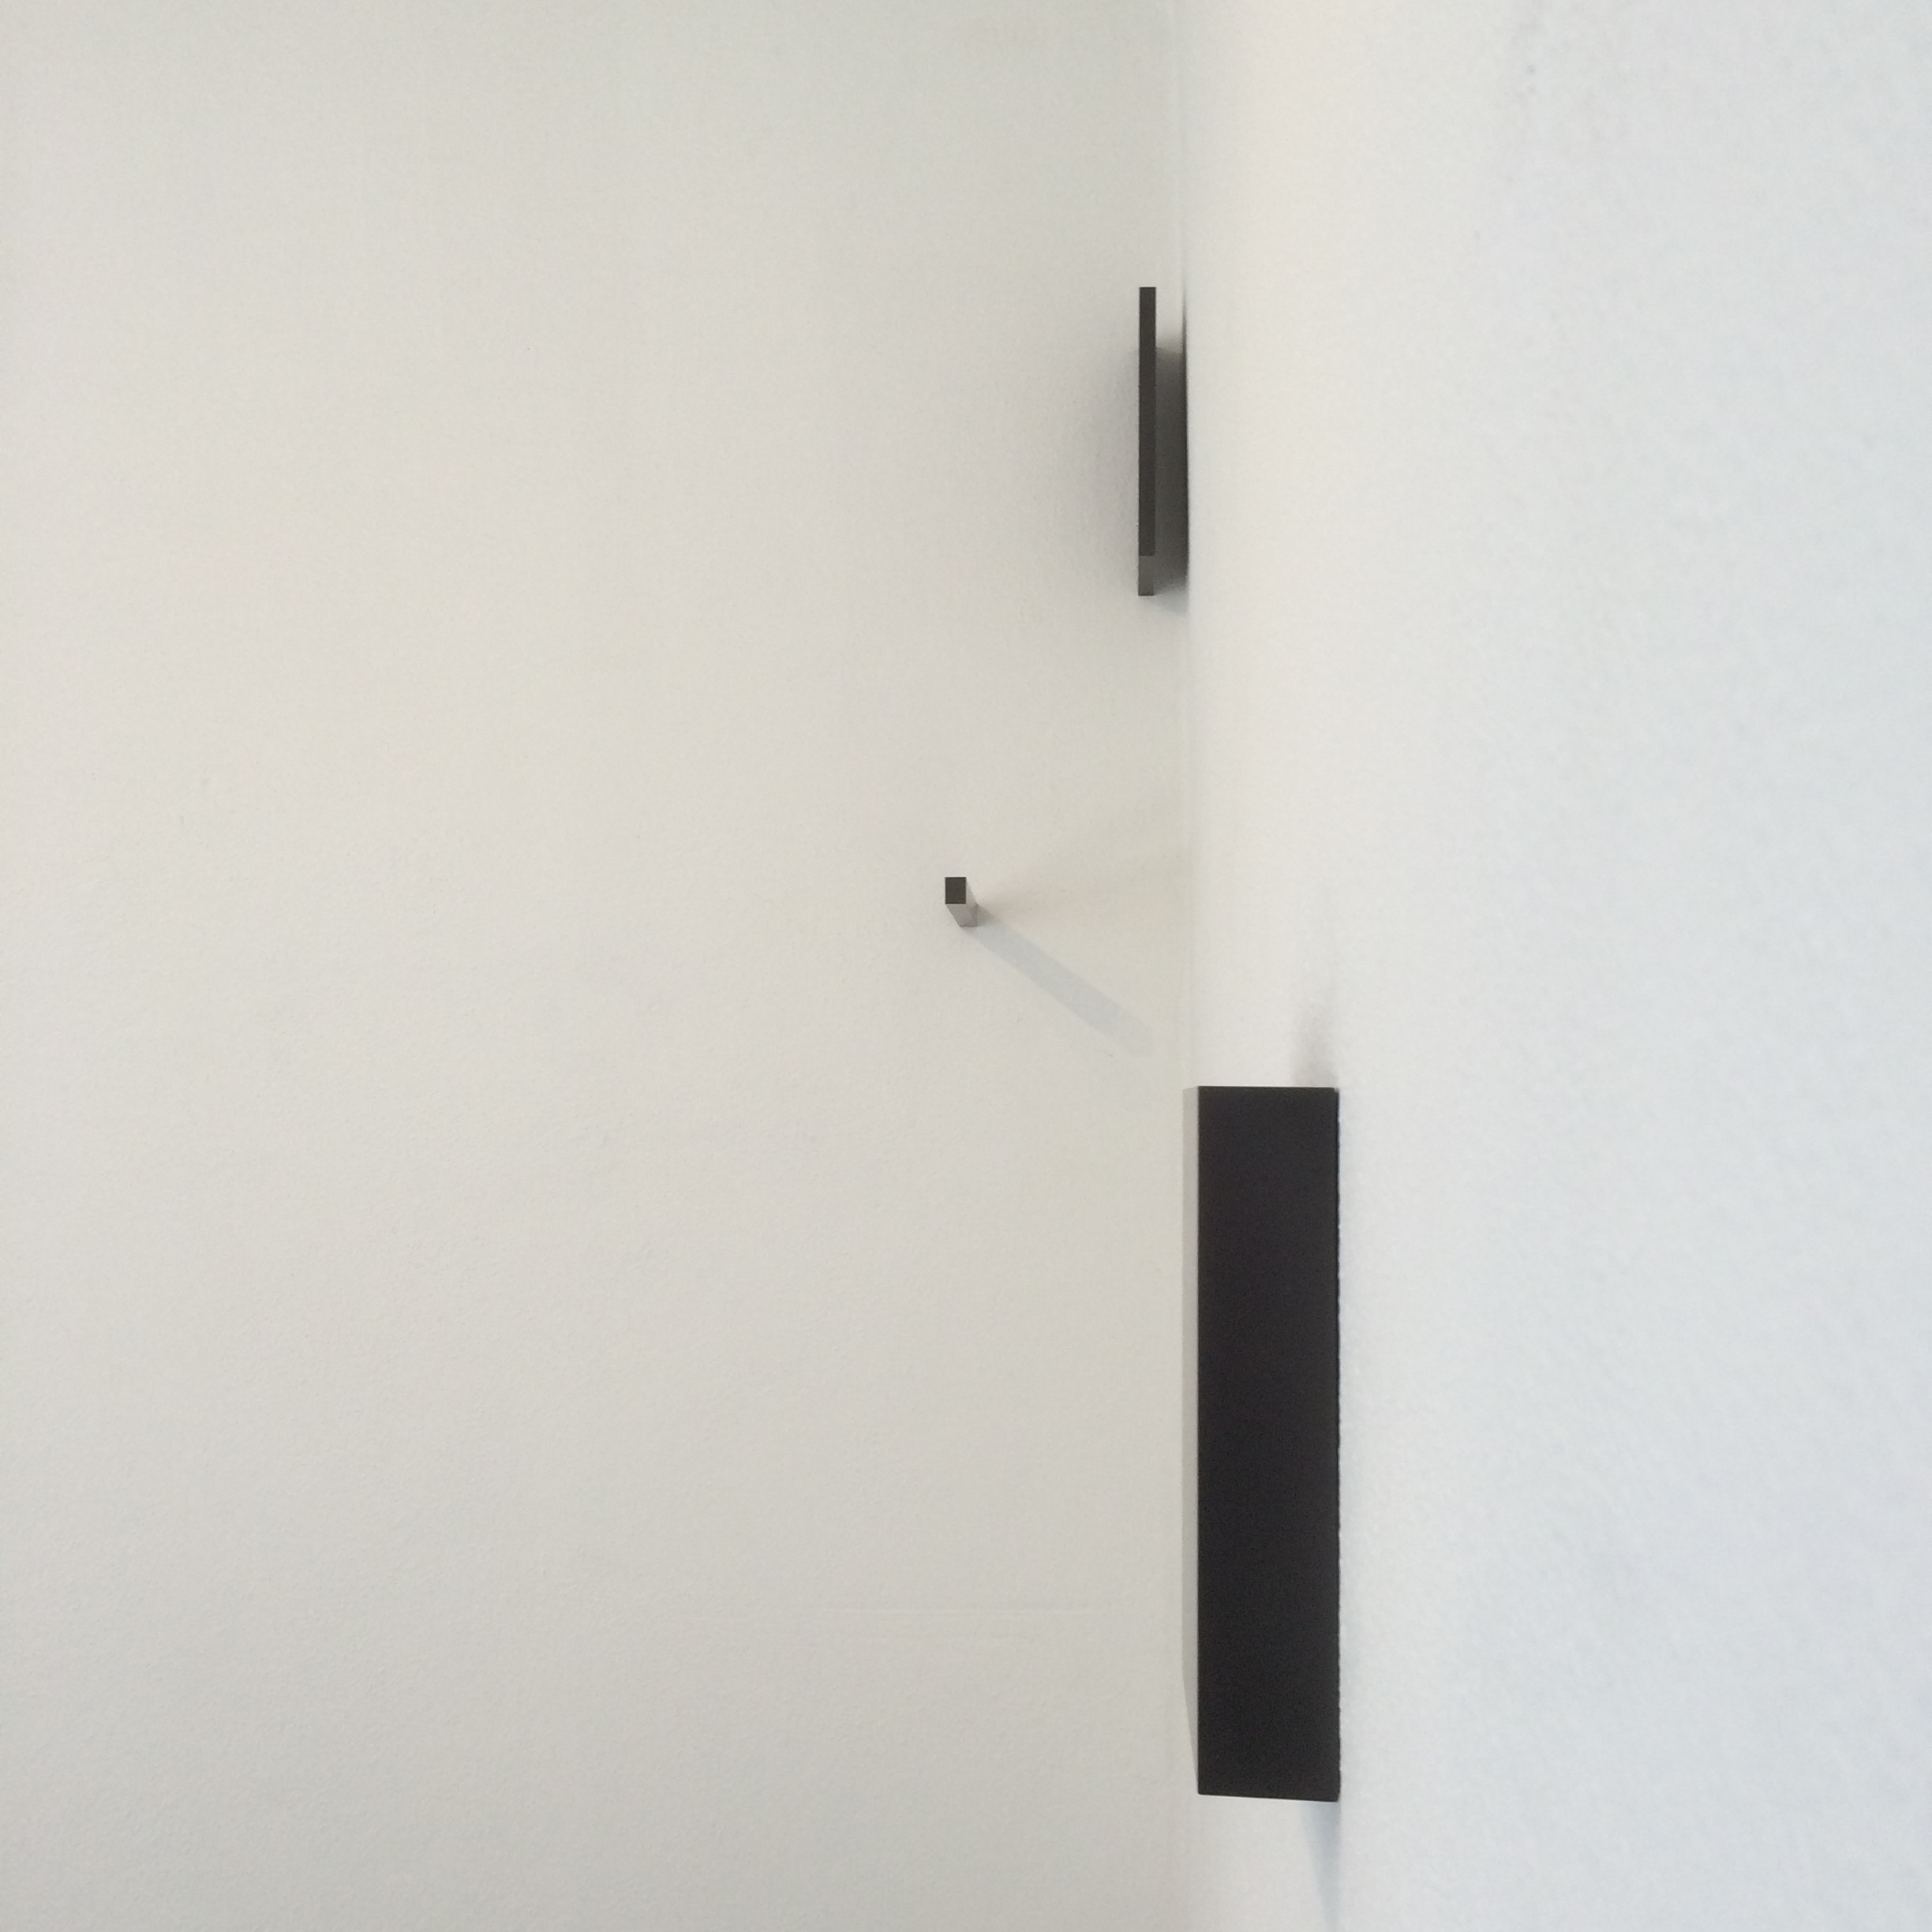  exhibitions 2d (installation view, 2016)  Dimensions variable, Solid graphite 